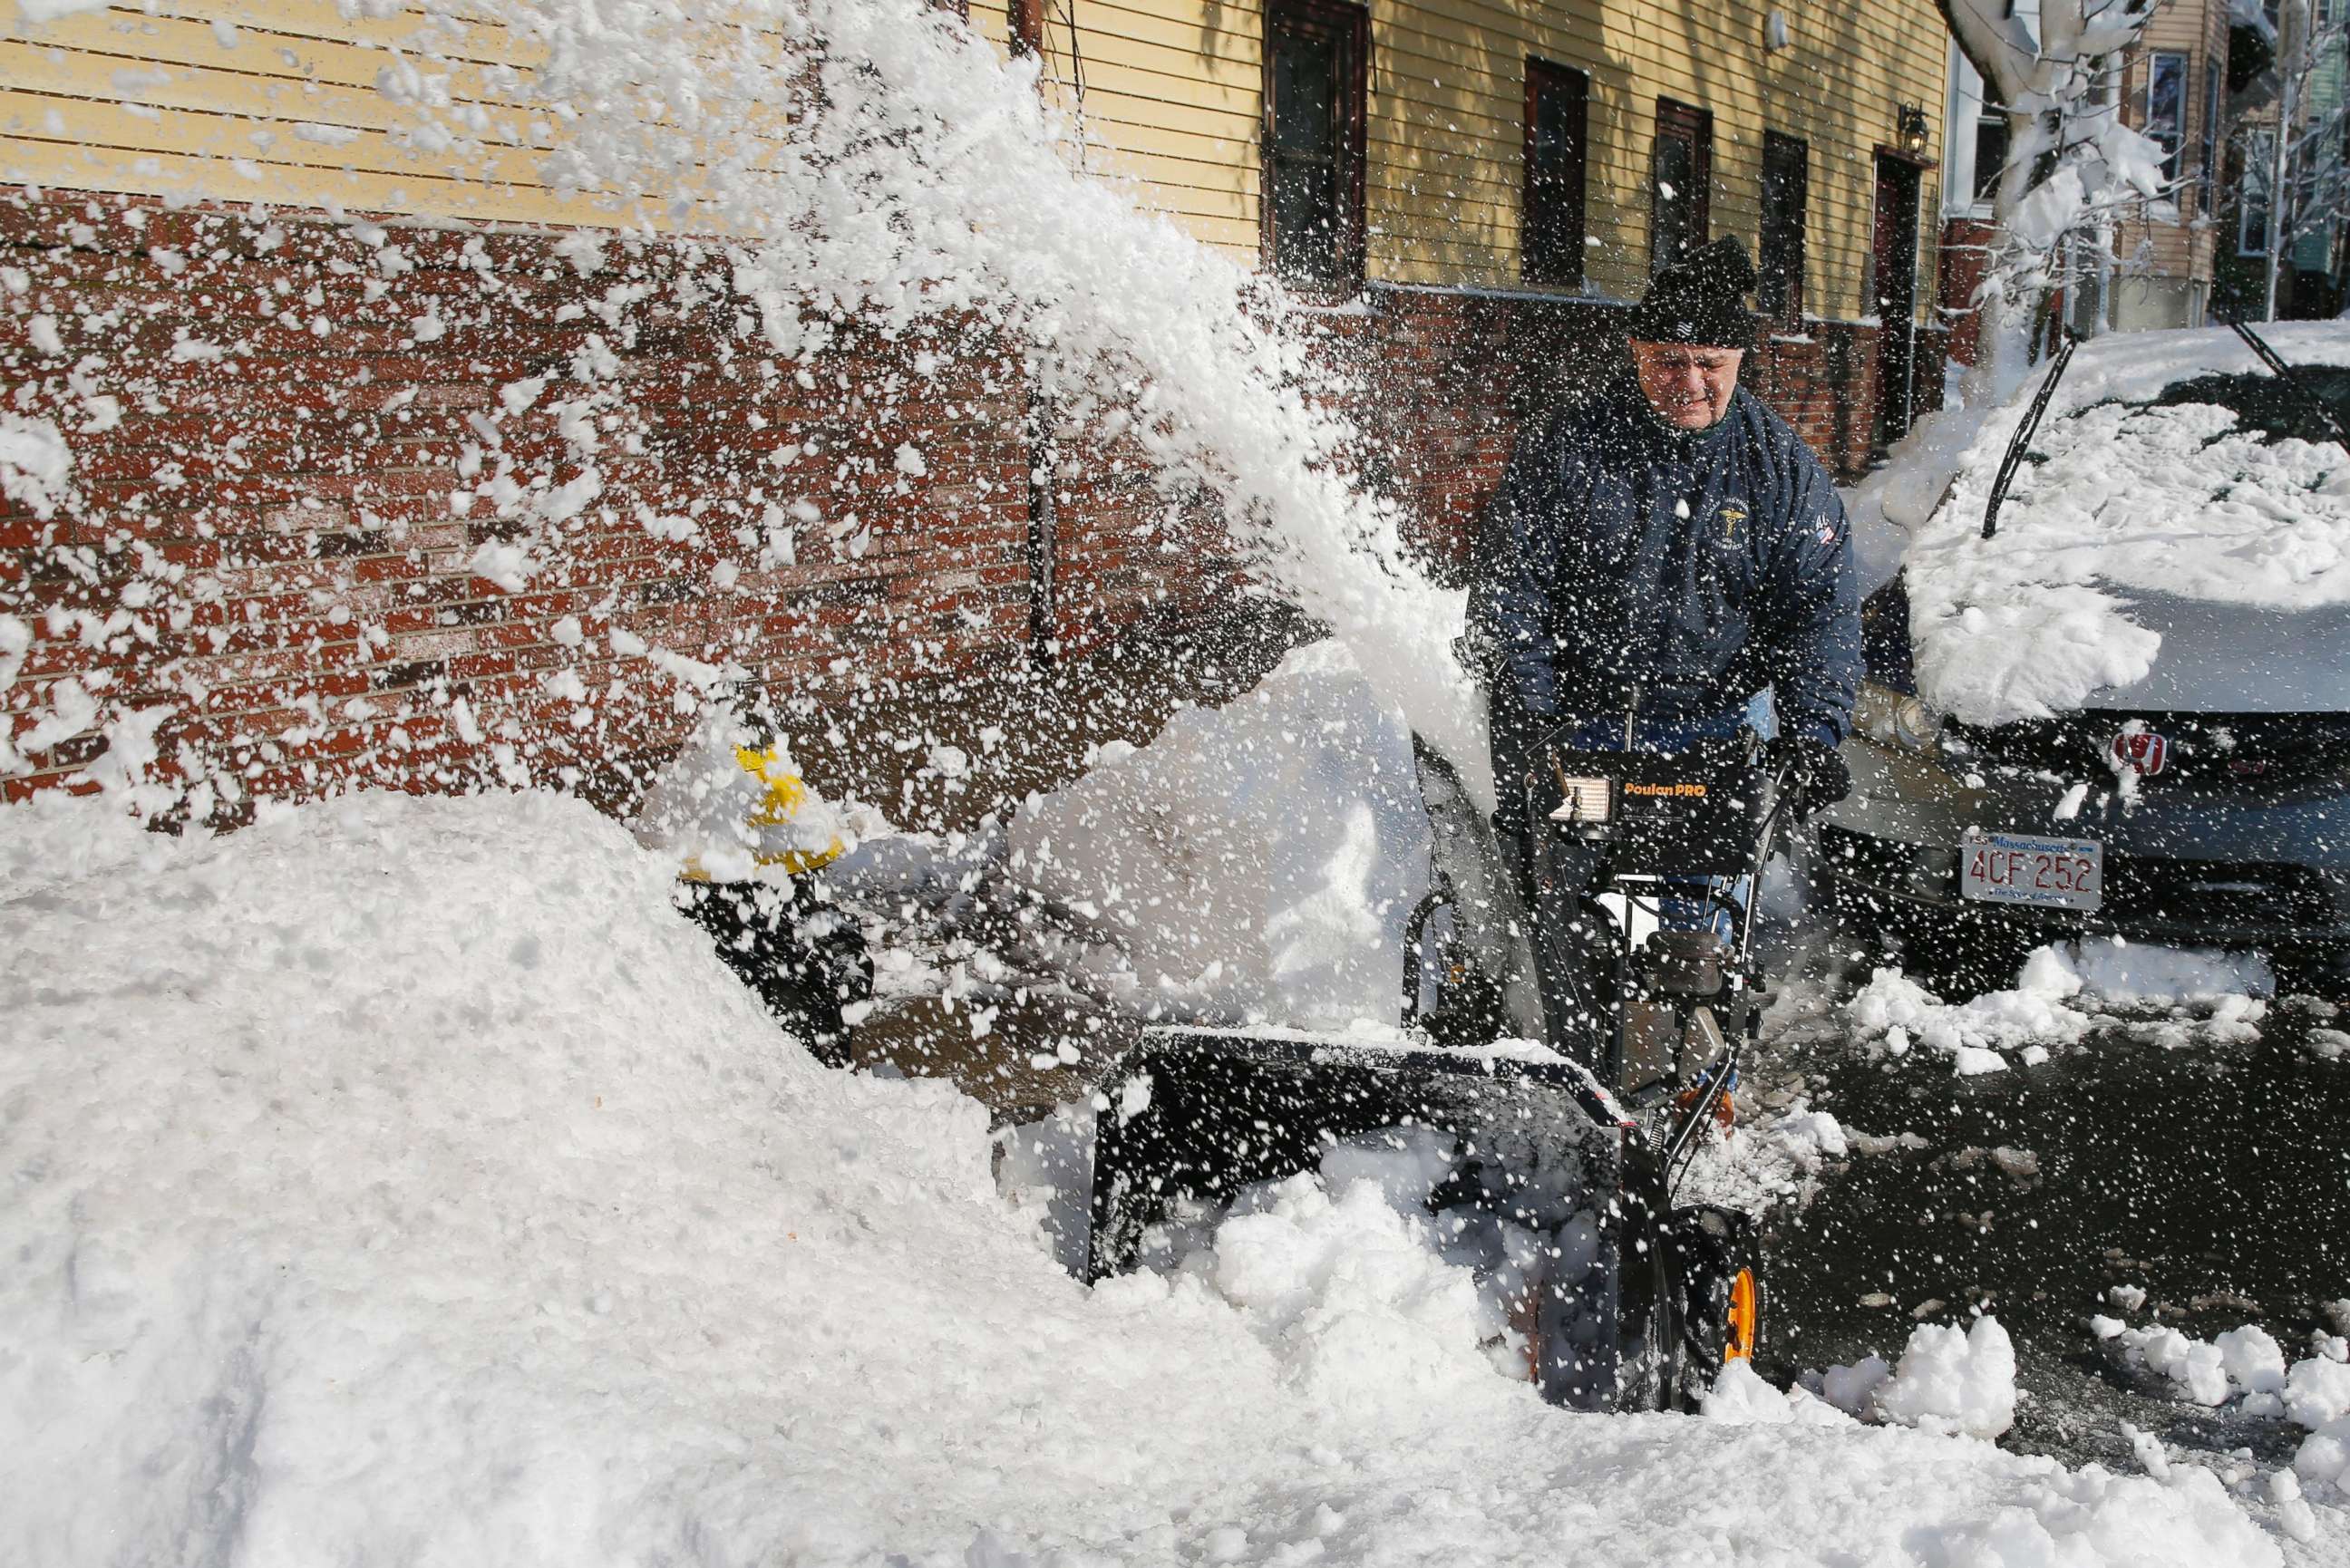 PHOTO: Al Gambale clears snow on Cottage Street in Boston, March 14, 2018. The Boston area was hit with it's third nor'easter of the month on Tuesday, a storm that brought powerful gusts of wind and over a foot of snow.